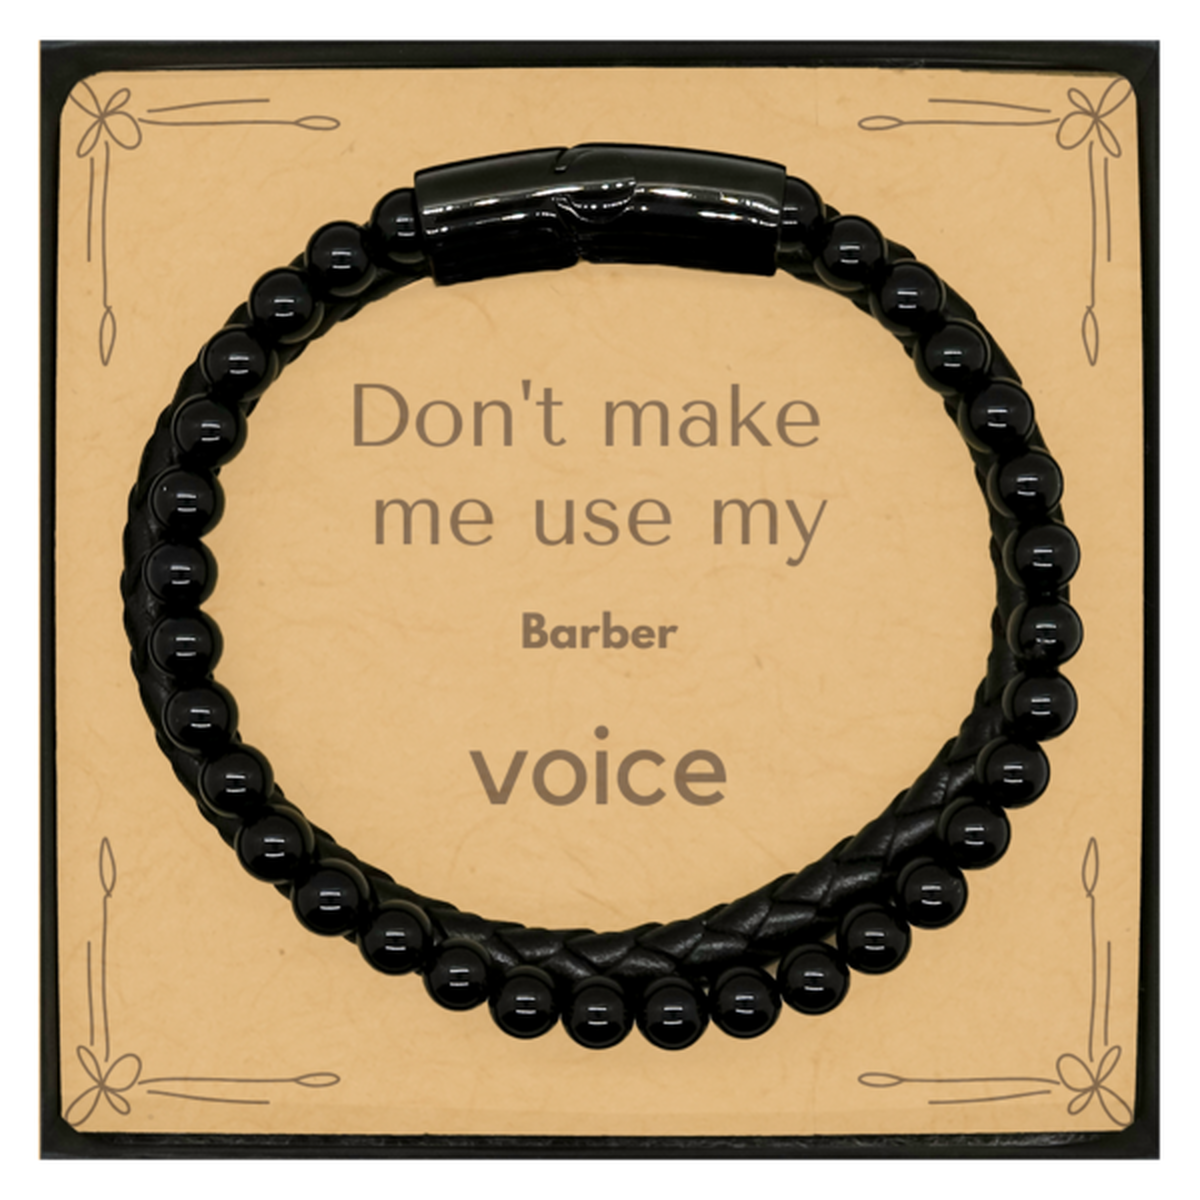 Don't make me use my Barber voice, Sarcasm Barber Card Gifts, Christmas Barber Stone Leather Bracelets Birthday Unique Gifts For Barber Coworkers, Men, Women, Colleague, Friends